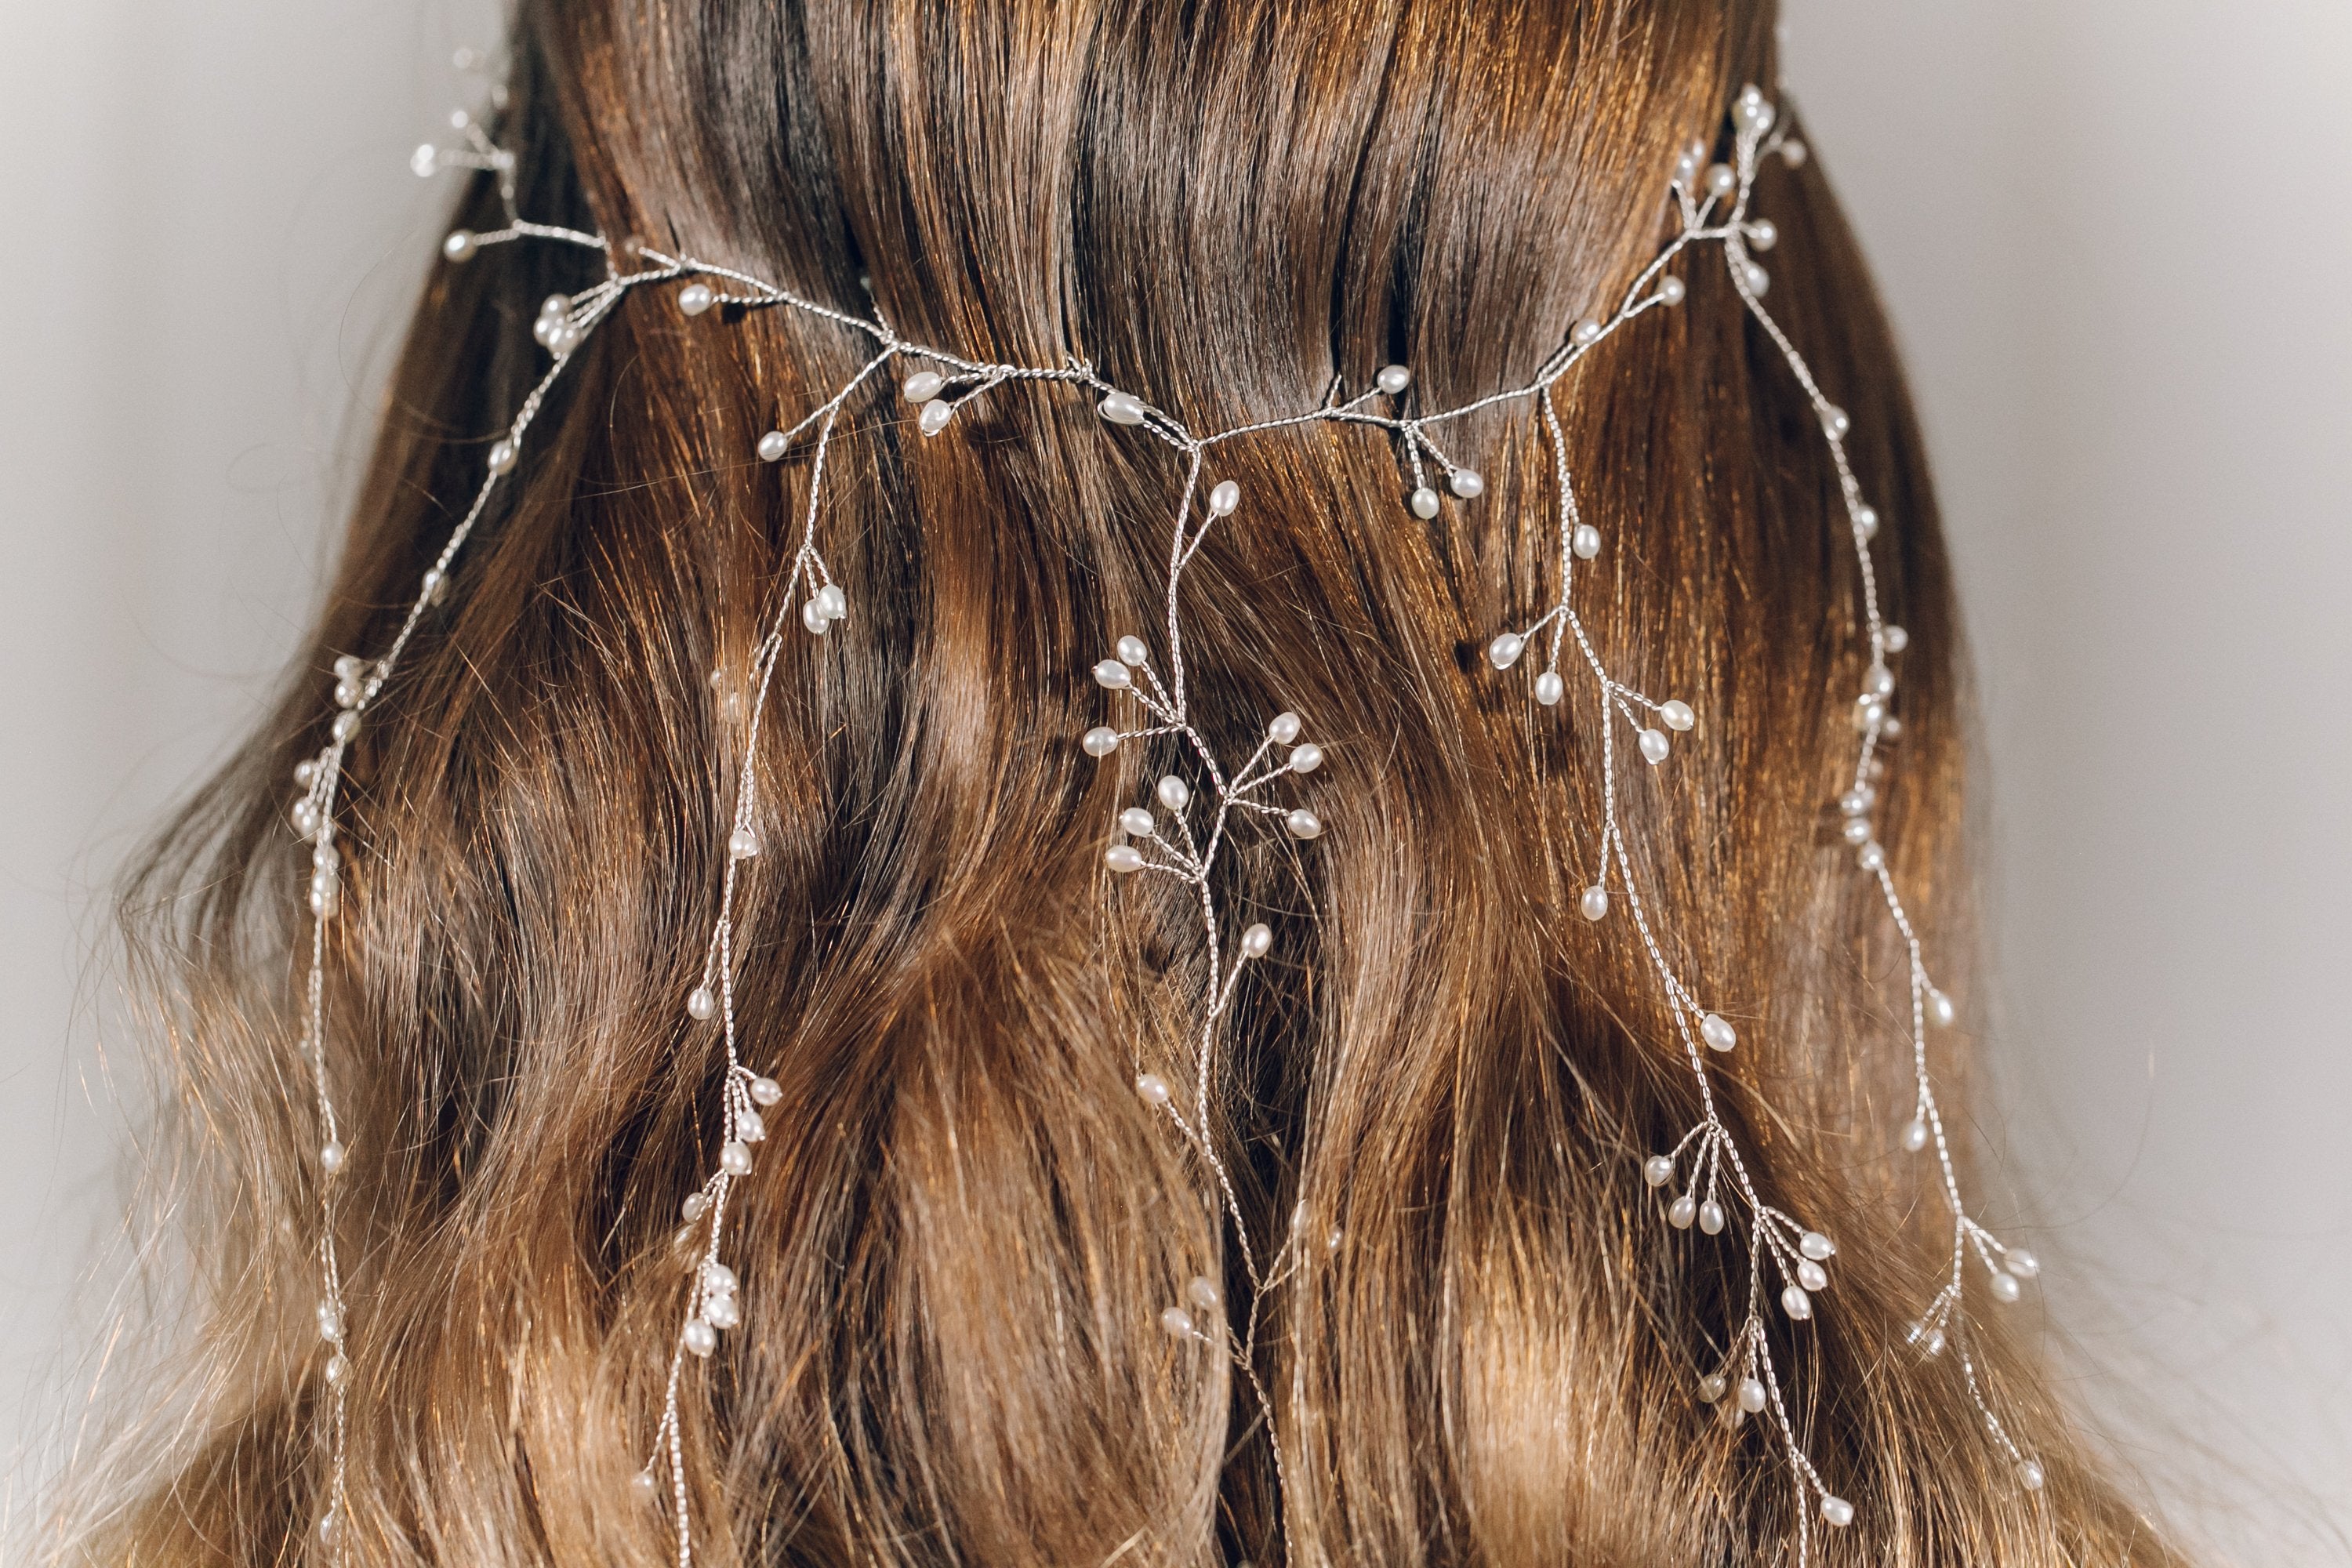 Veil hair vine with dangling strands in silver and freshwater pearl  - Elise